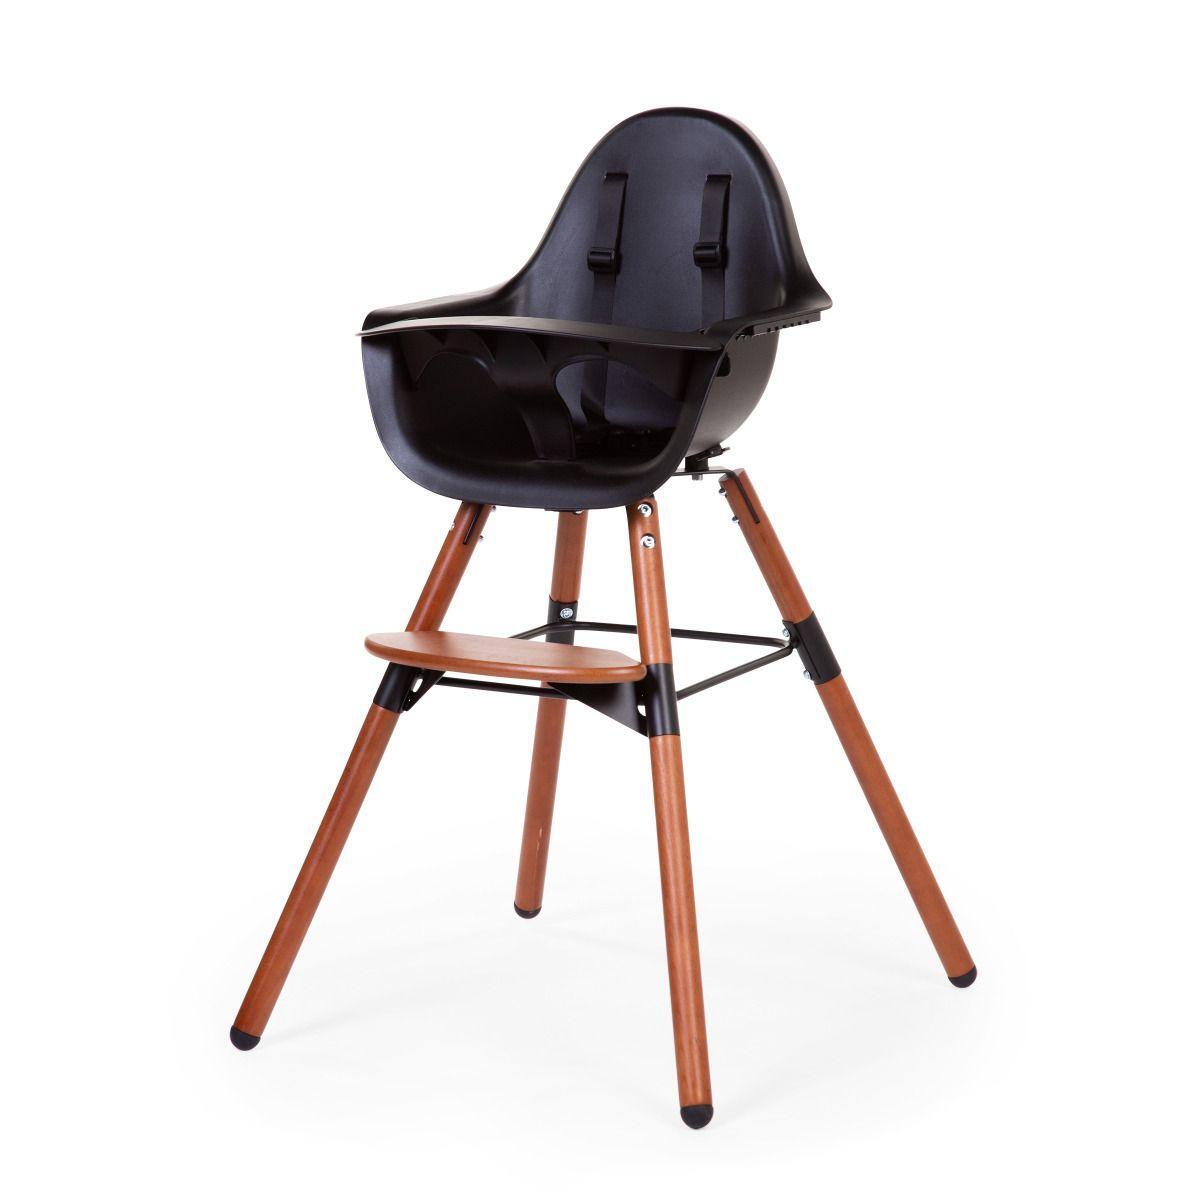 Childhome Evolu 2 chair 2in1, with bumper Nut Black